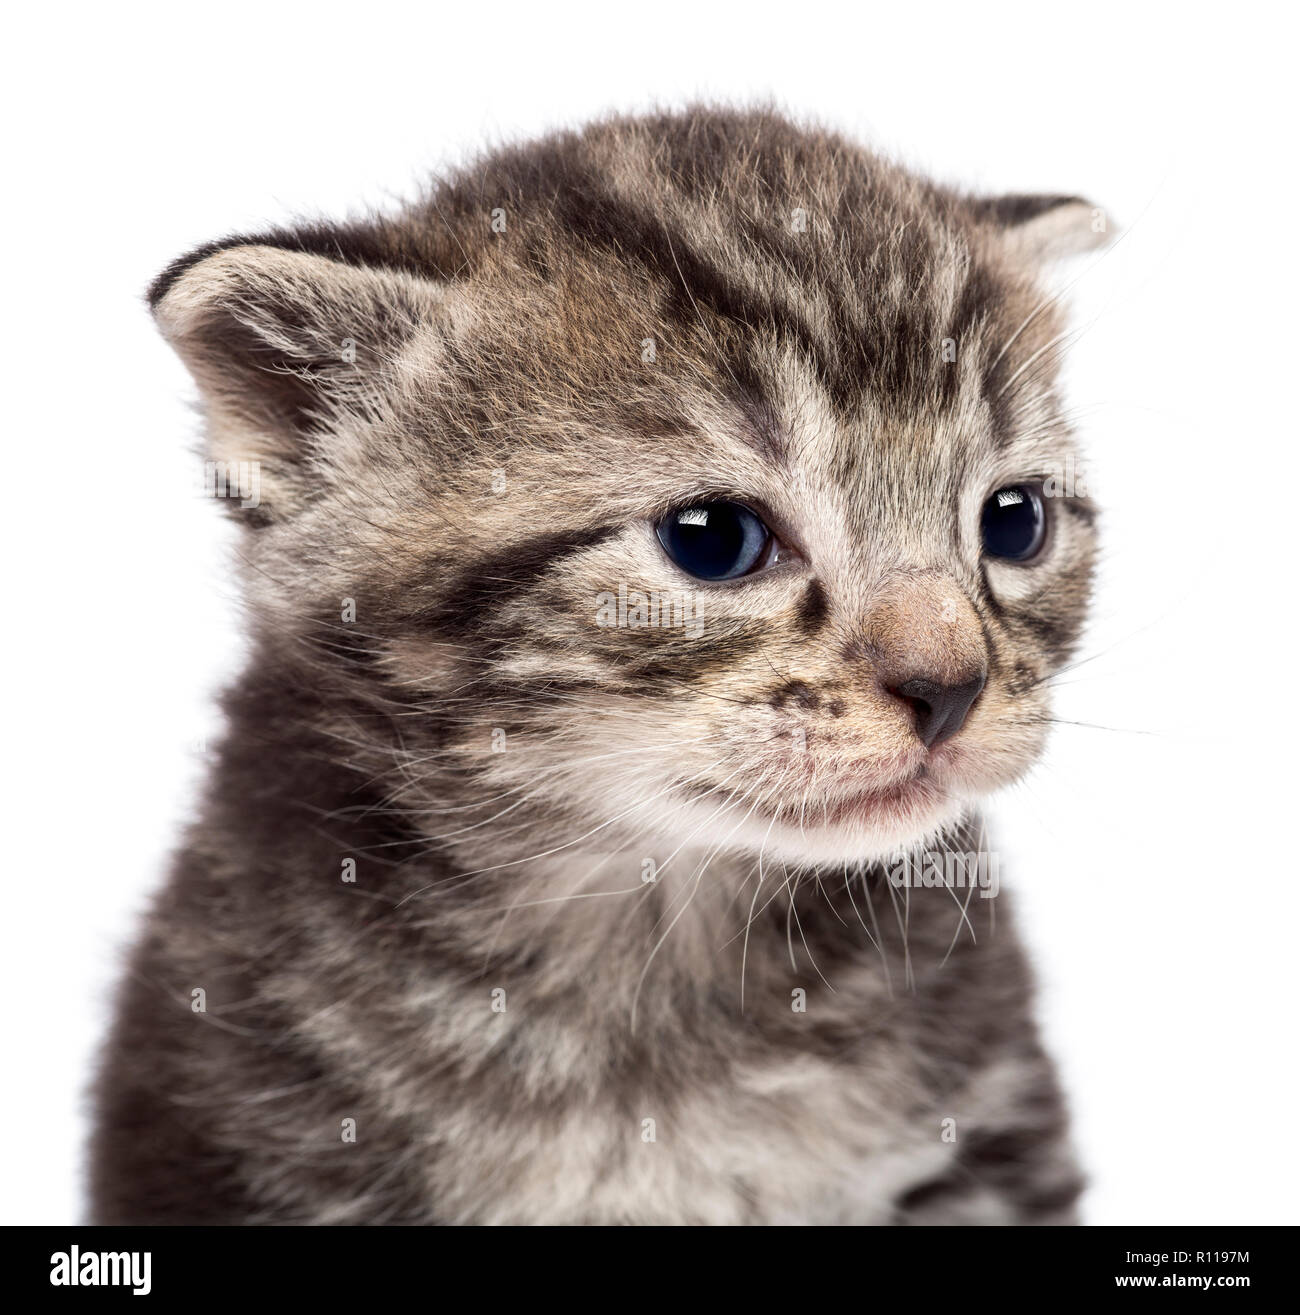 Close-up of kitten against white background Stock Photo